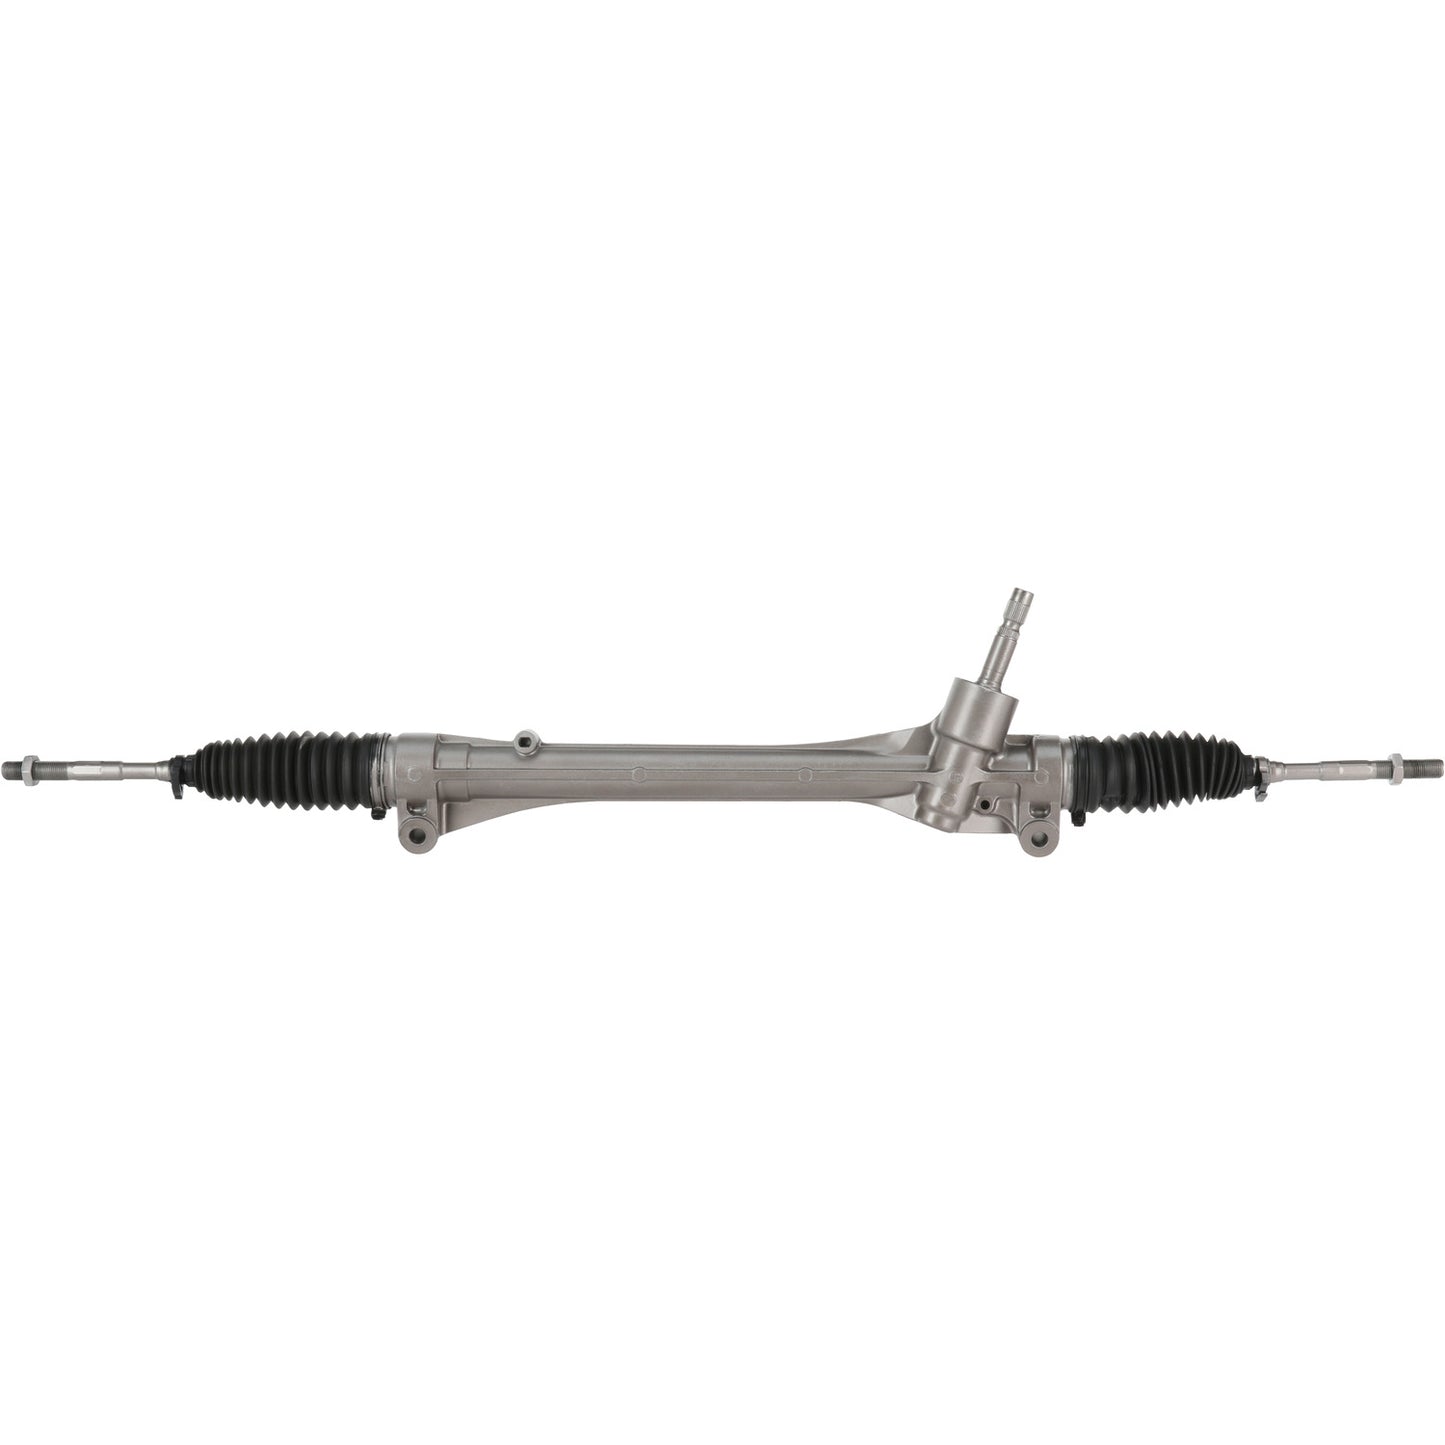 Rack and Pinion Assembly - MAVAL - Manual - Remanufactured - 94358M